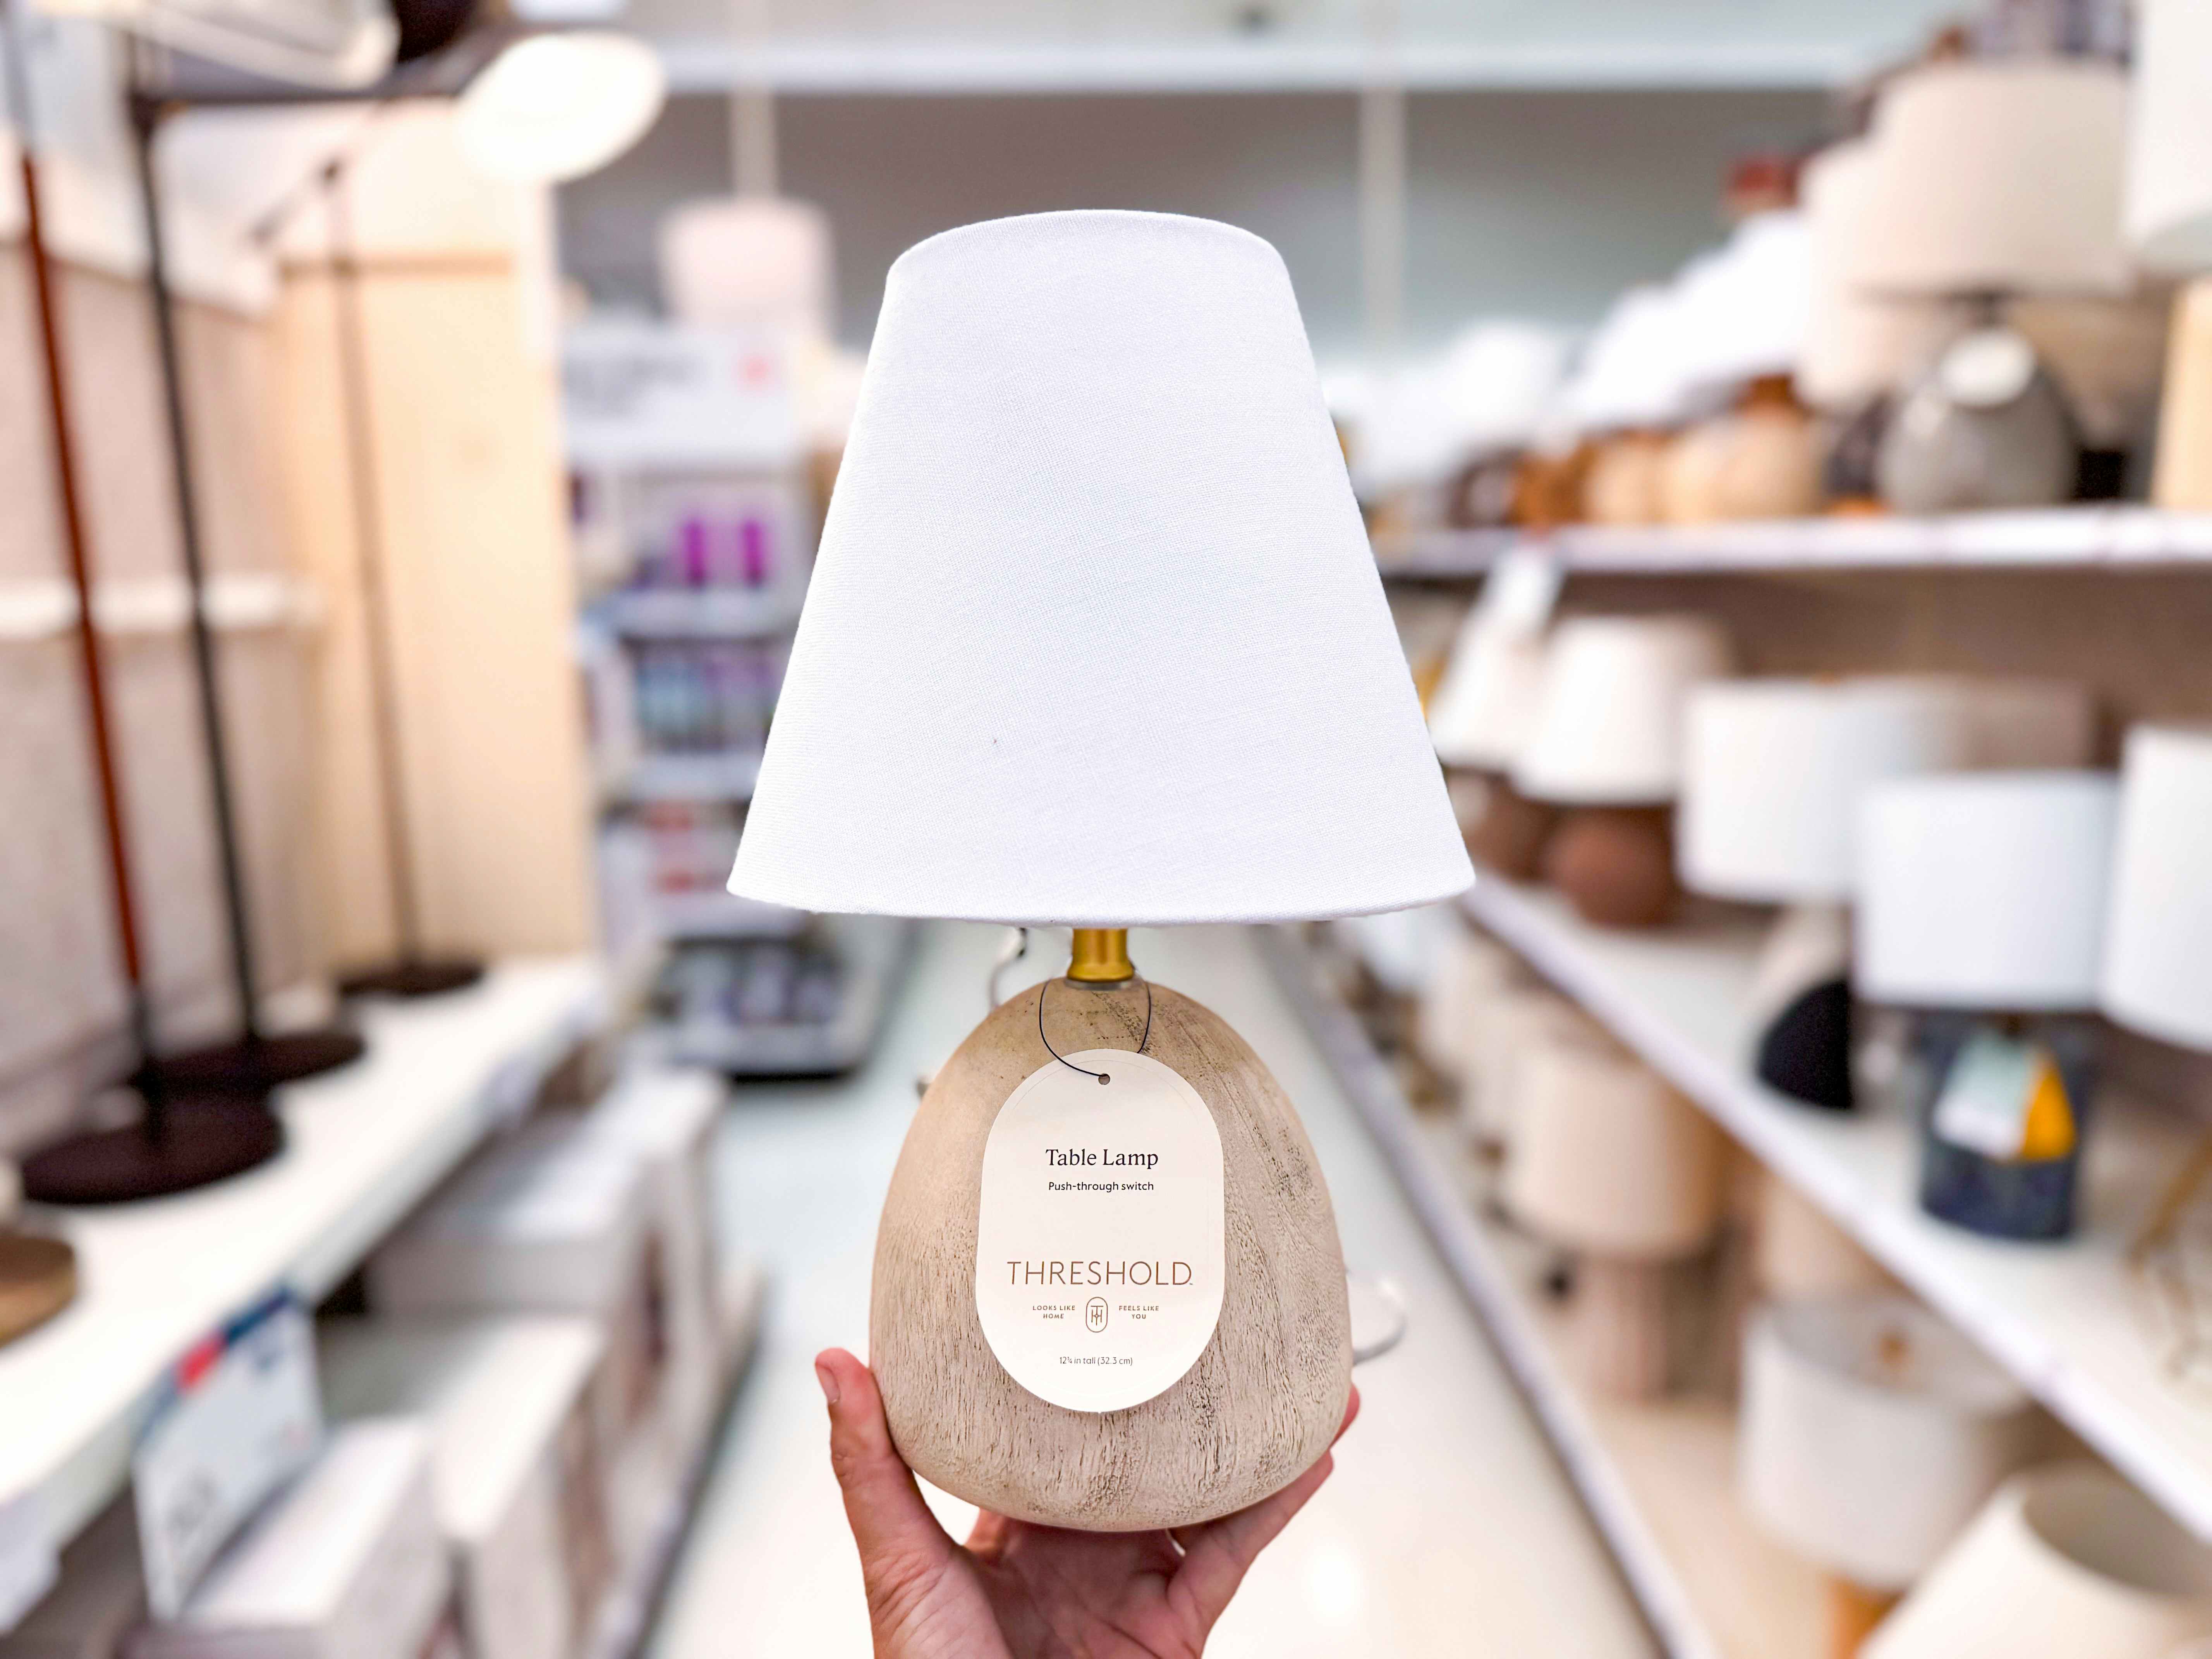 Save on Threshold Table Lamps at Target: Prices Start at $6